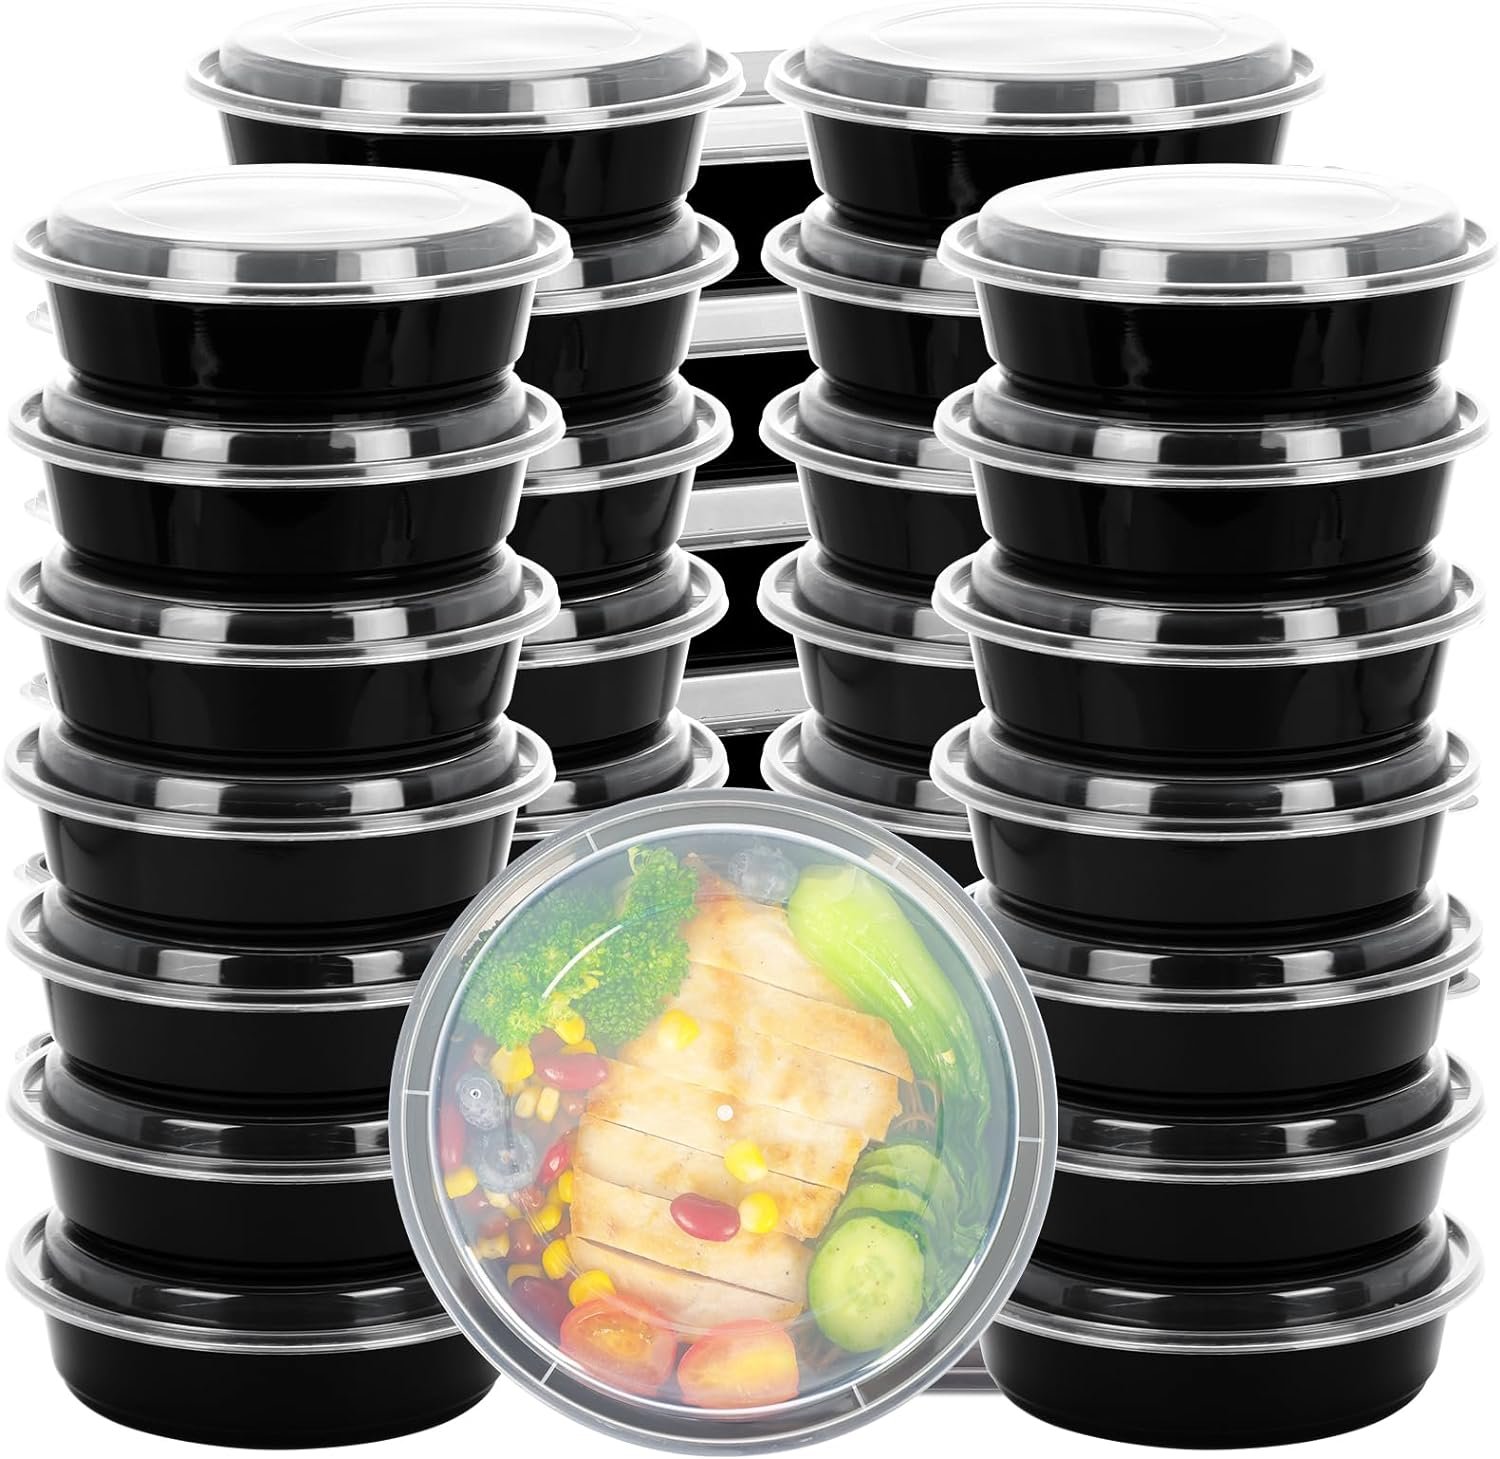 Moretoes Food Storage Containers Review